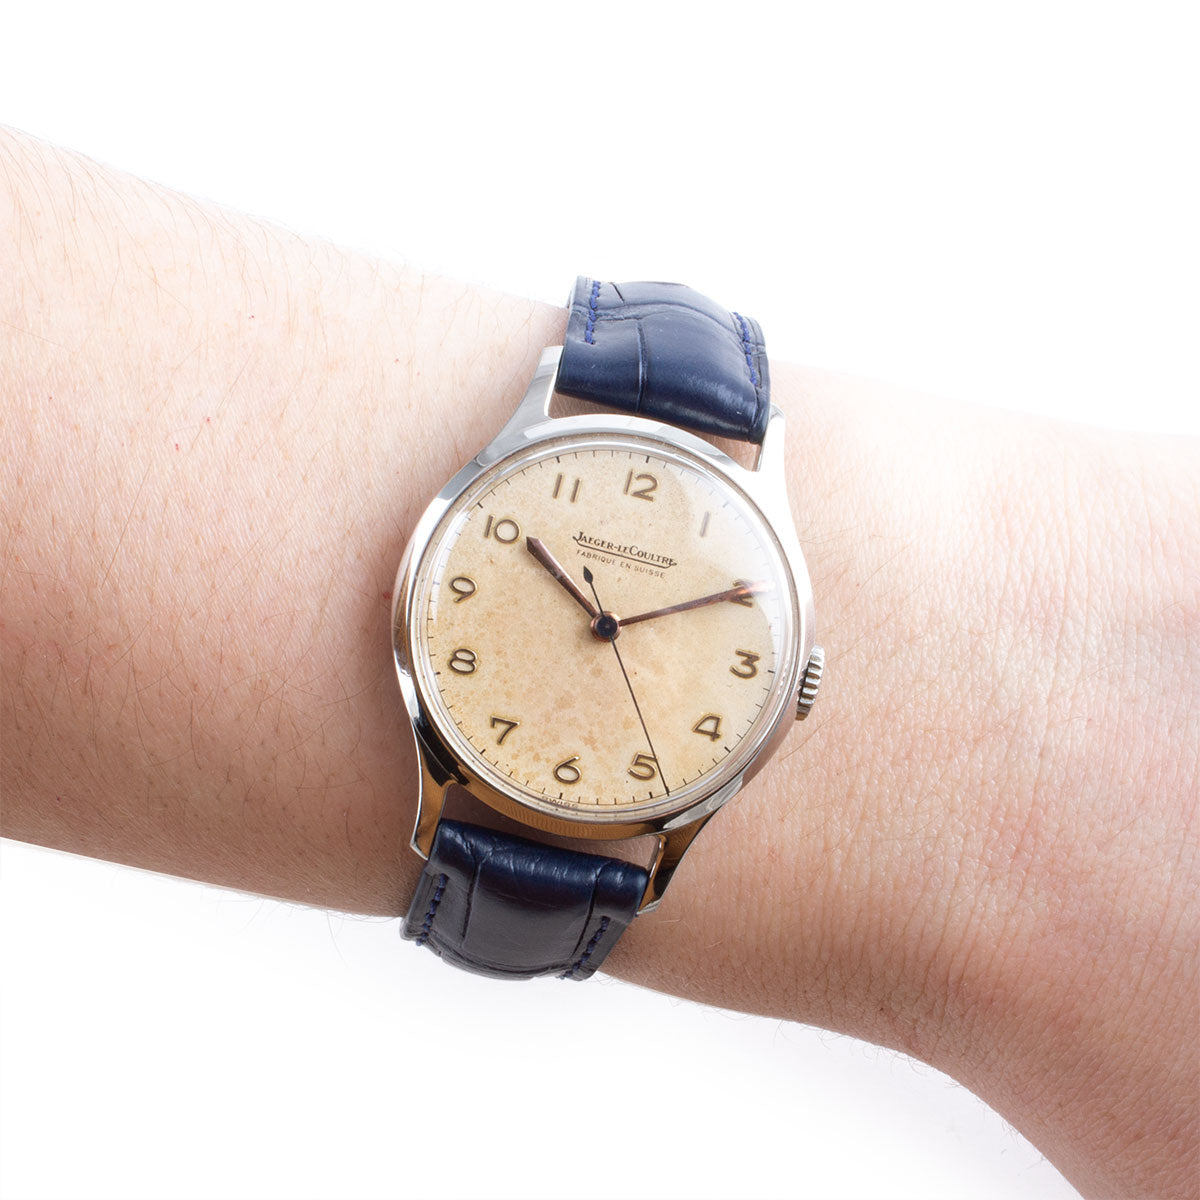 ​Second-hand watch - Jaeger Lecoultre - 1800€